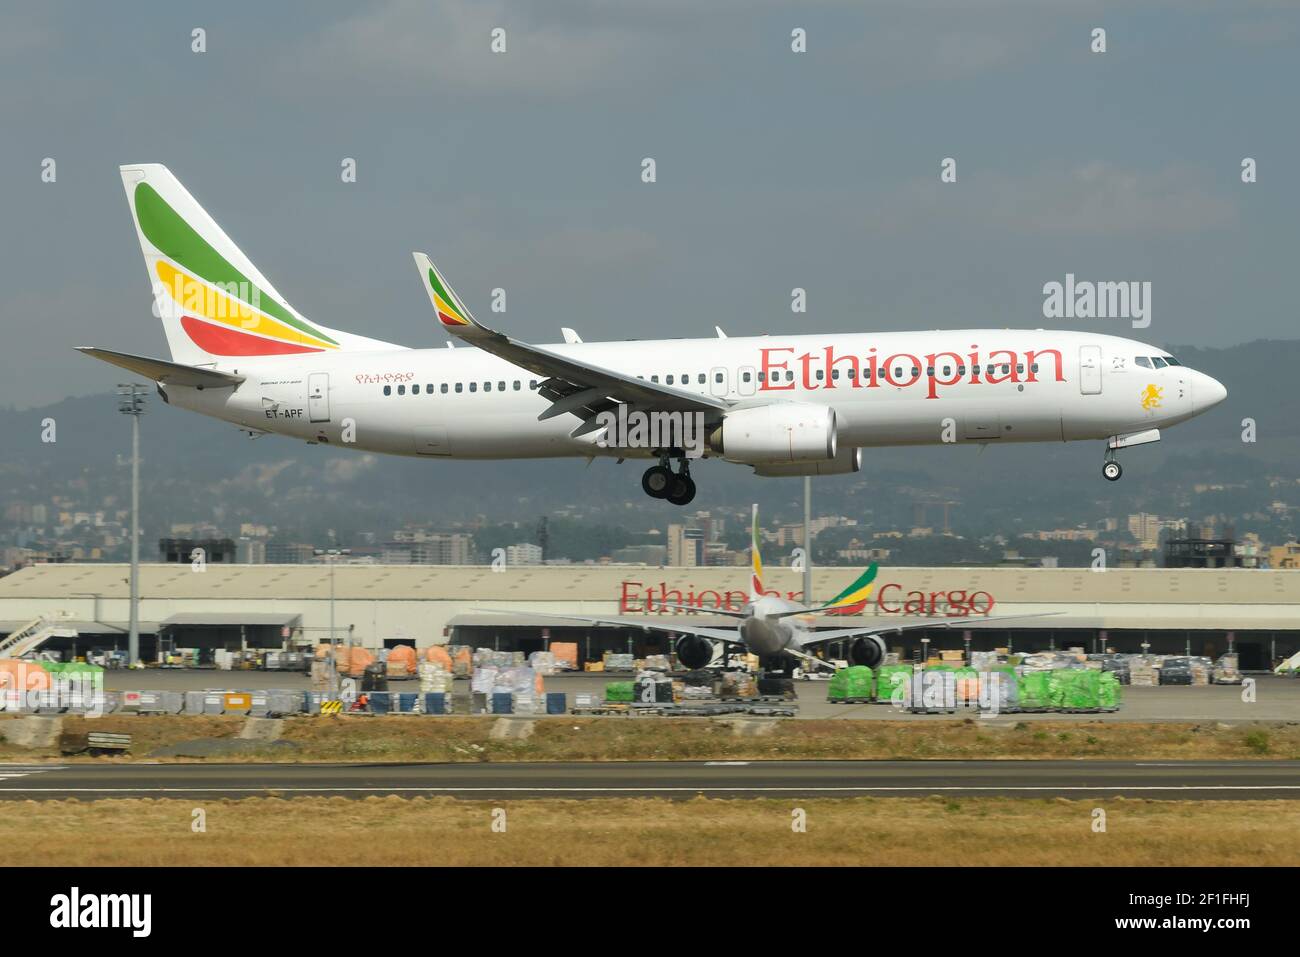 Ethiopian Airlines Boeing 737 aircraft at Addis Ababa Bole International Airport in Ethiopia, the hub of Ethiopian Air Lines. Airplane ET-APF 737-800 Stock Photo